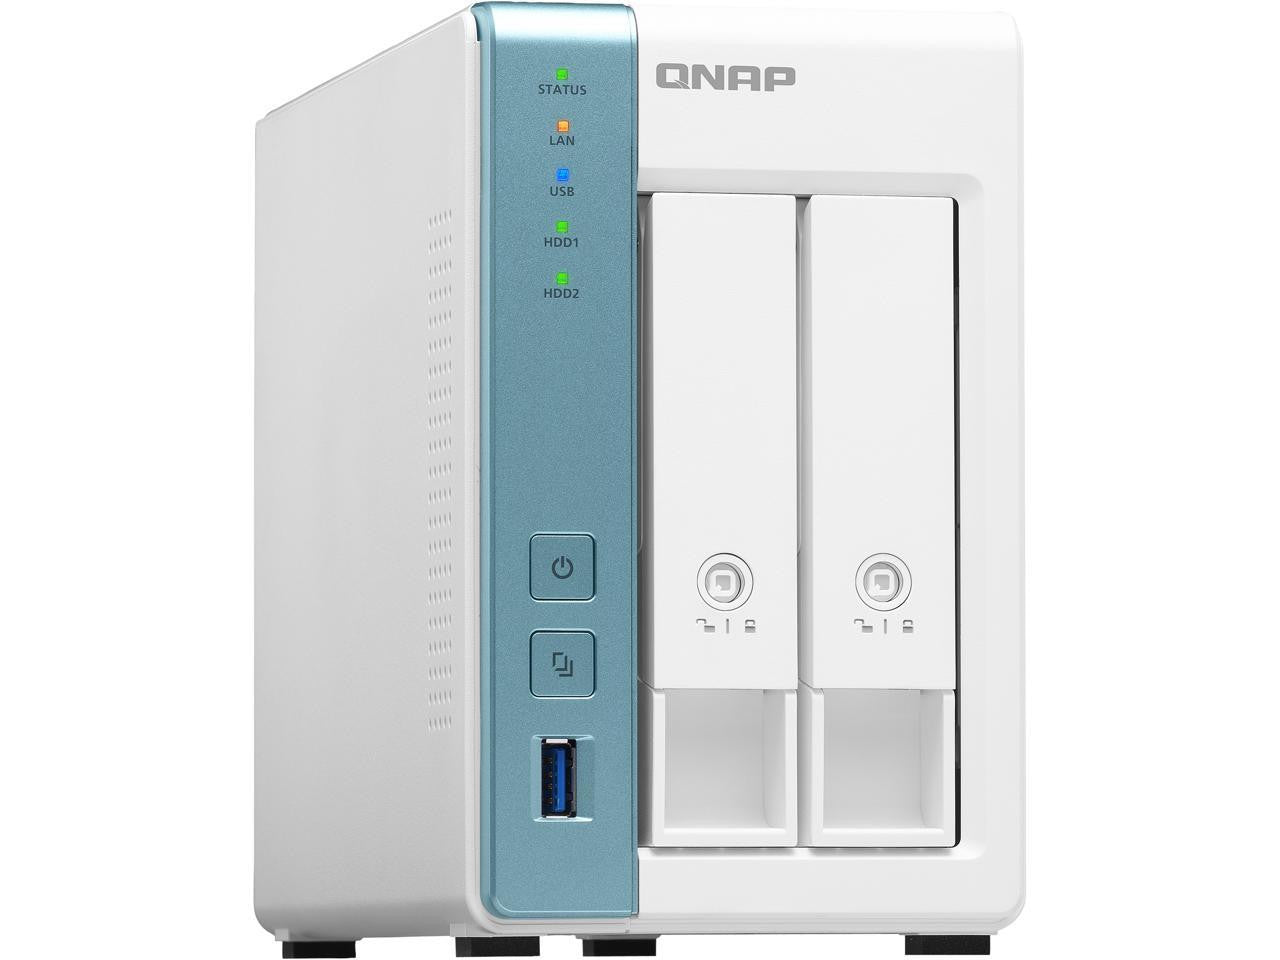 QNAP TS-231K 2-Bay Home NAS with 24TB (2 x 12TB) of Western Digital Red Plus Drives Fully Assembled and Tested